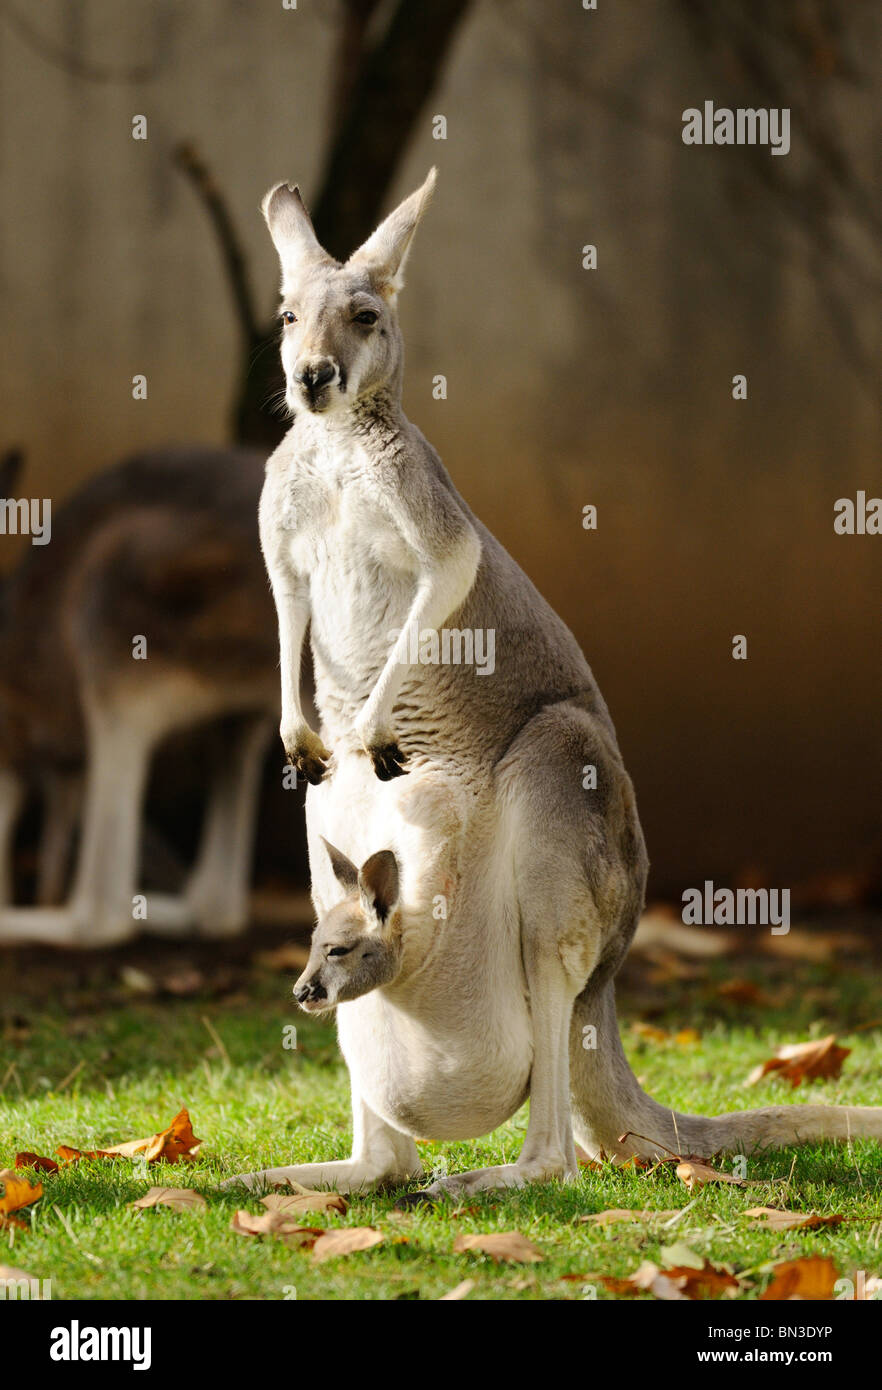 Giant Red Kangaroo (Macropus rufus) with joey in pouch Stock Photo